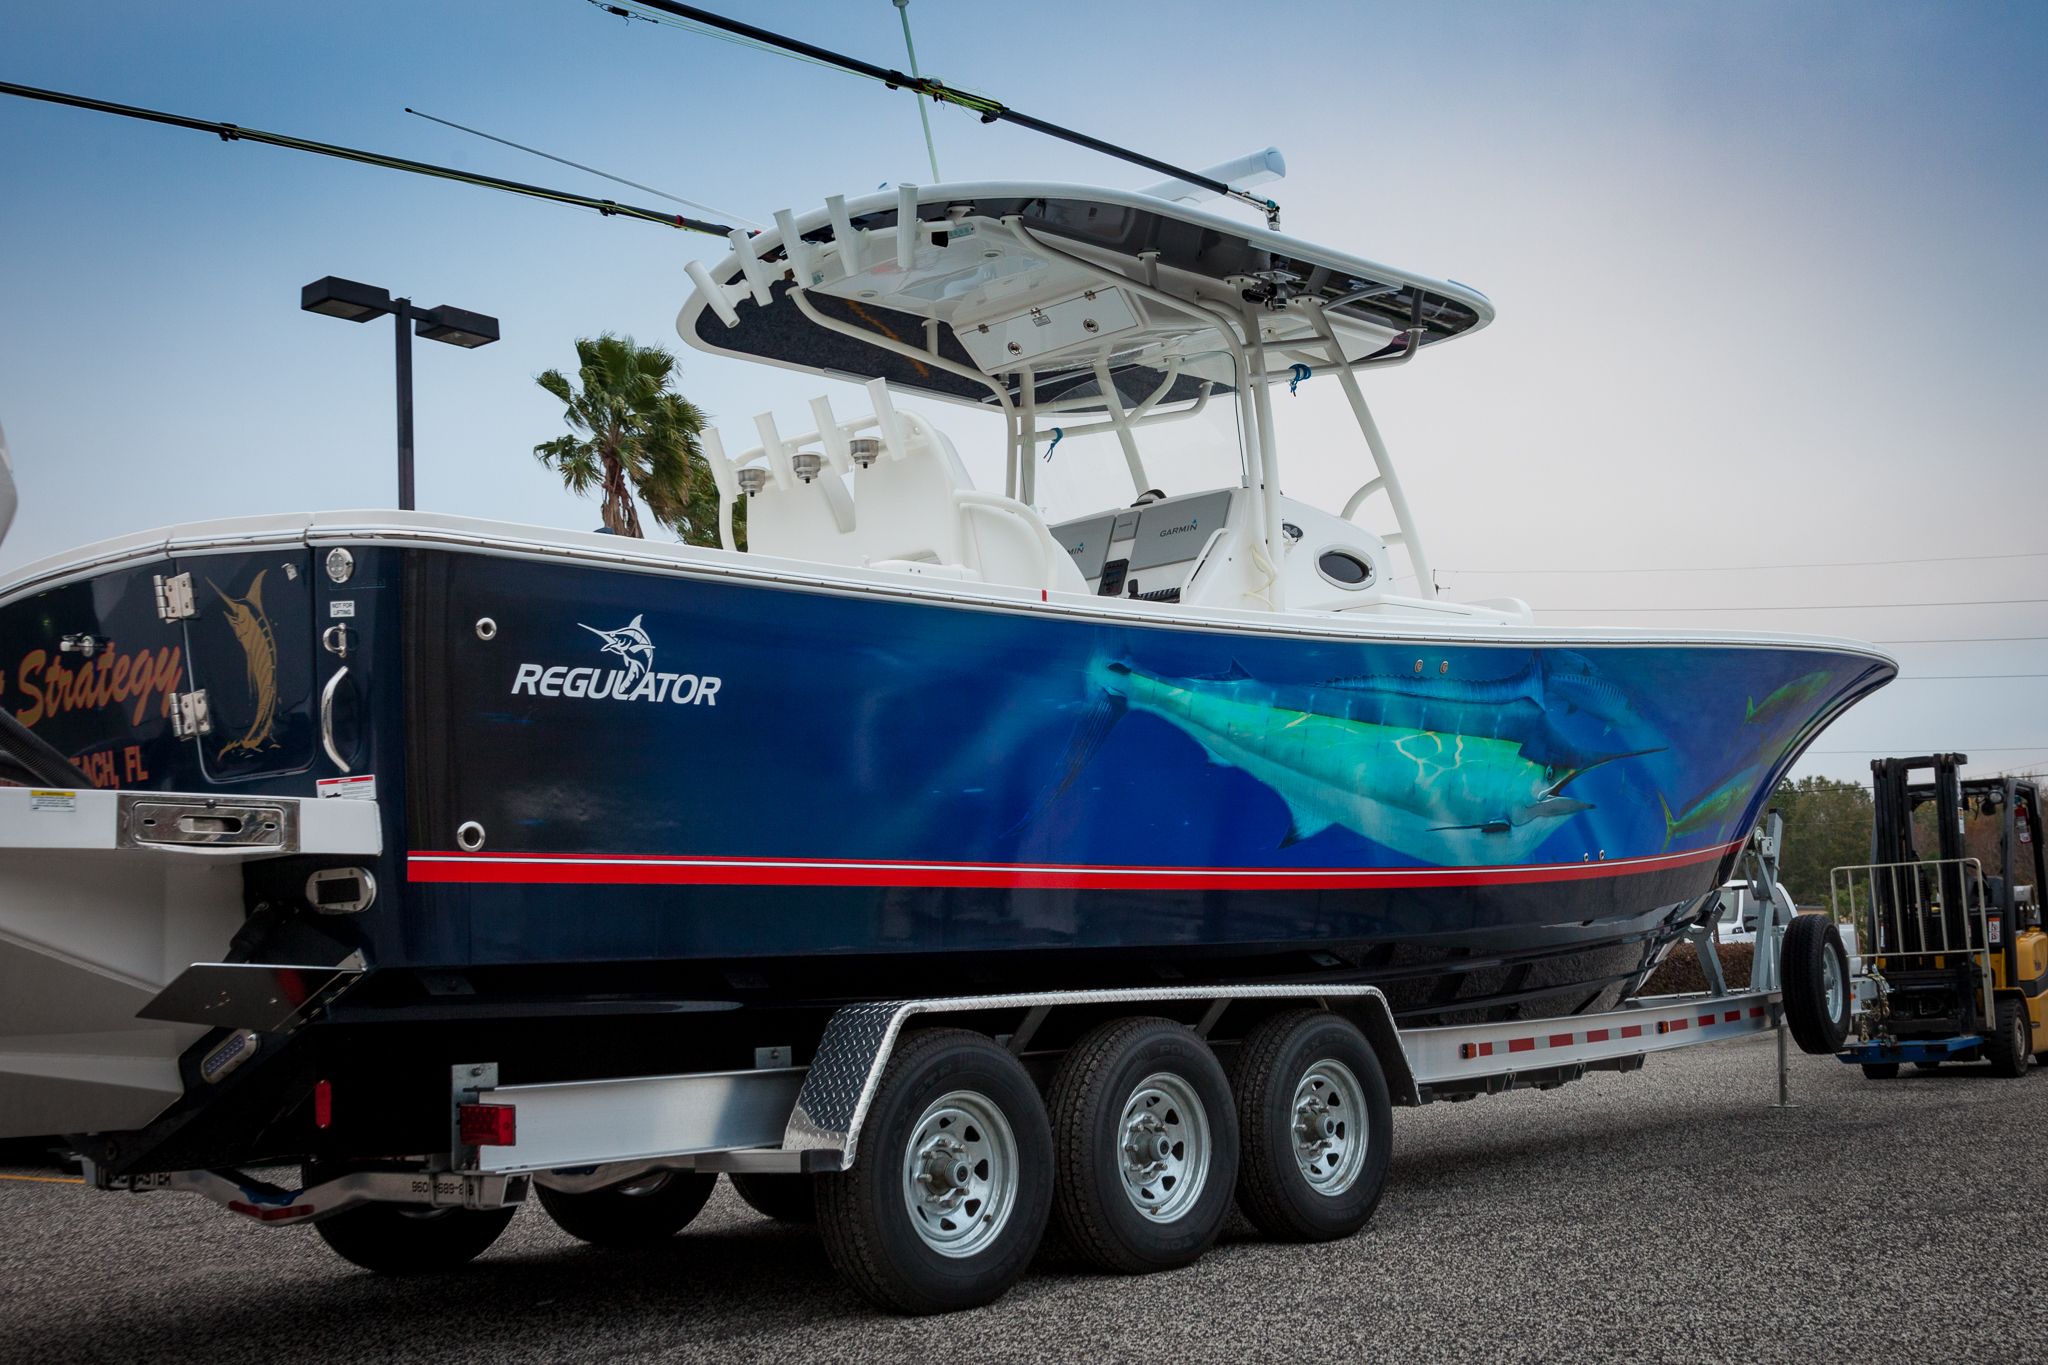 Full image of the professional full vinyl wrap on the "Regulator" fishing boat pulled on a long trailer. Professional "Regulator" design wrapped by Wraps Direct located in Jacksonville, FL